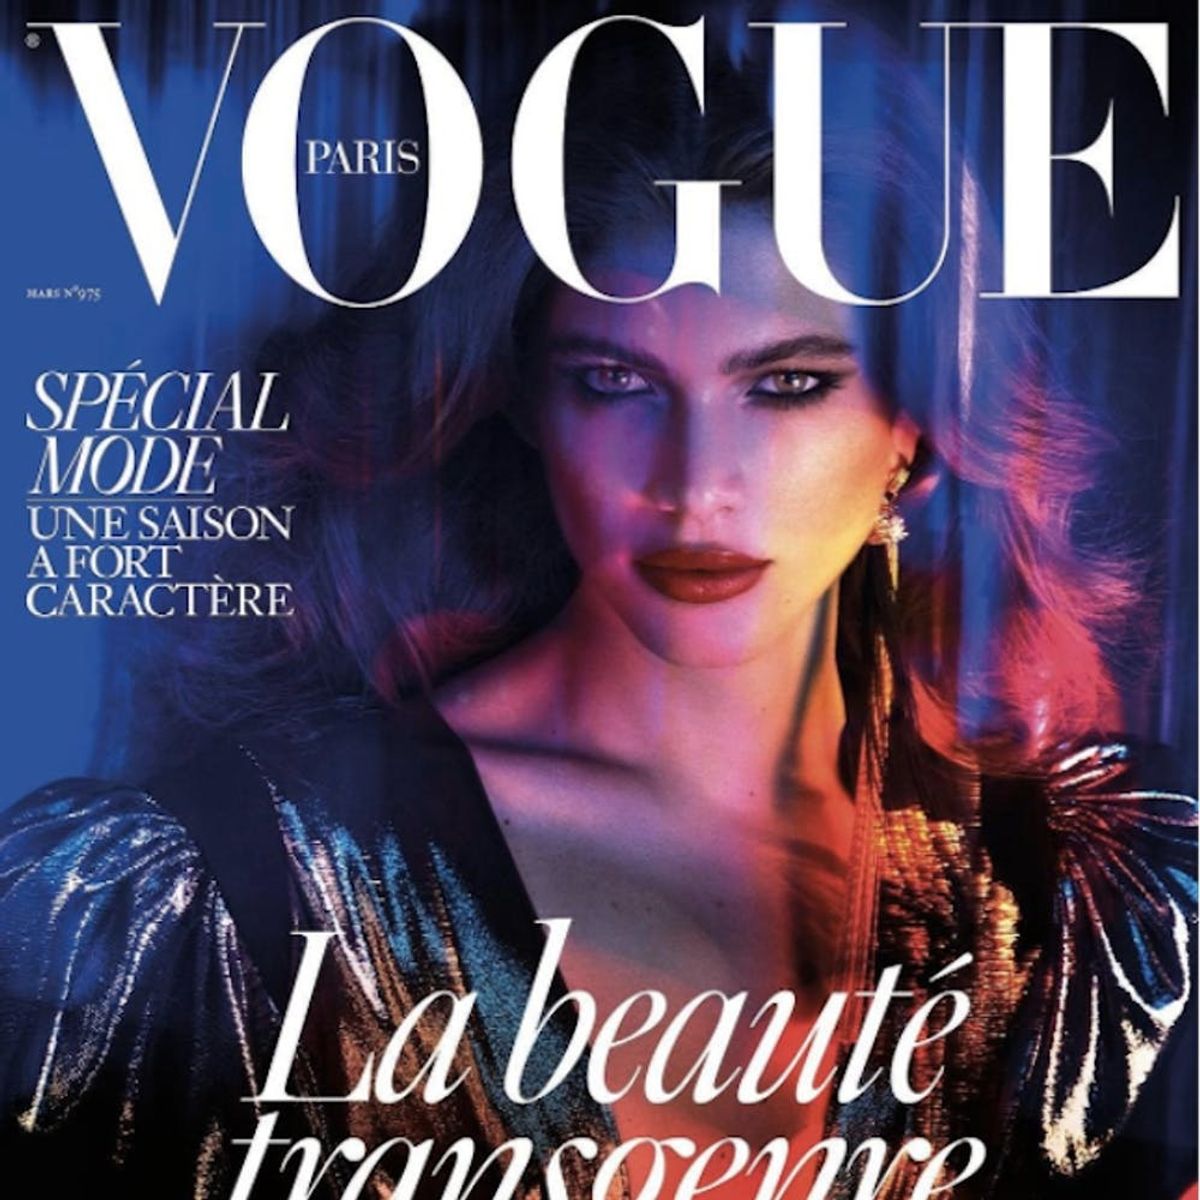 French Vogue Has Finally Put a Transgender Model on Their Cover